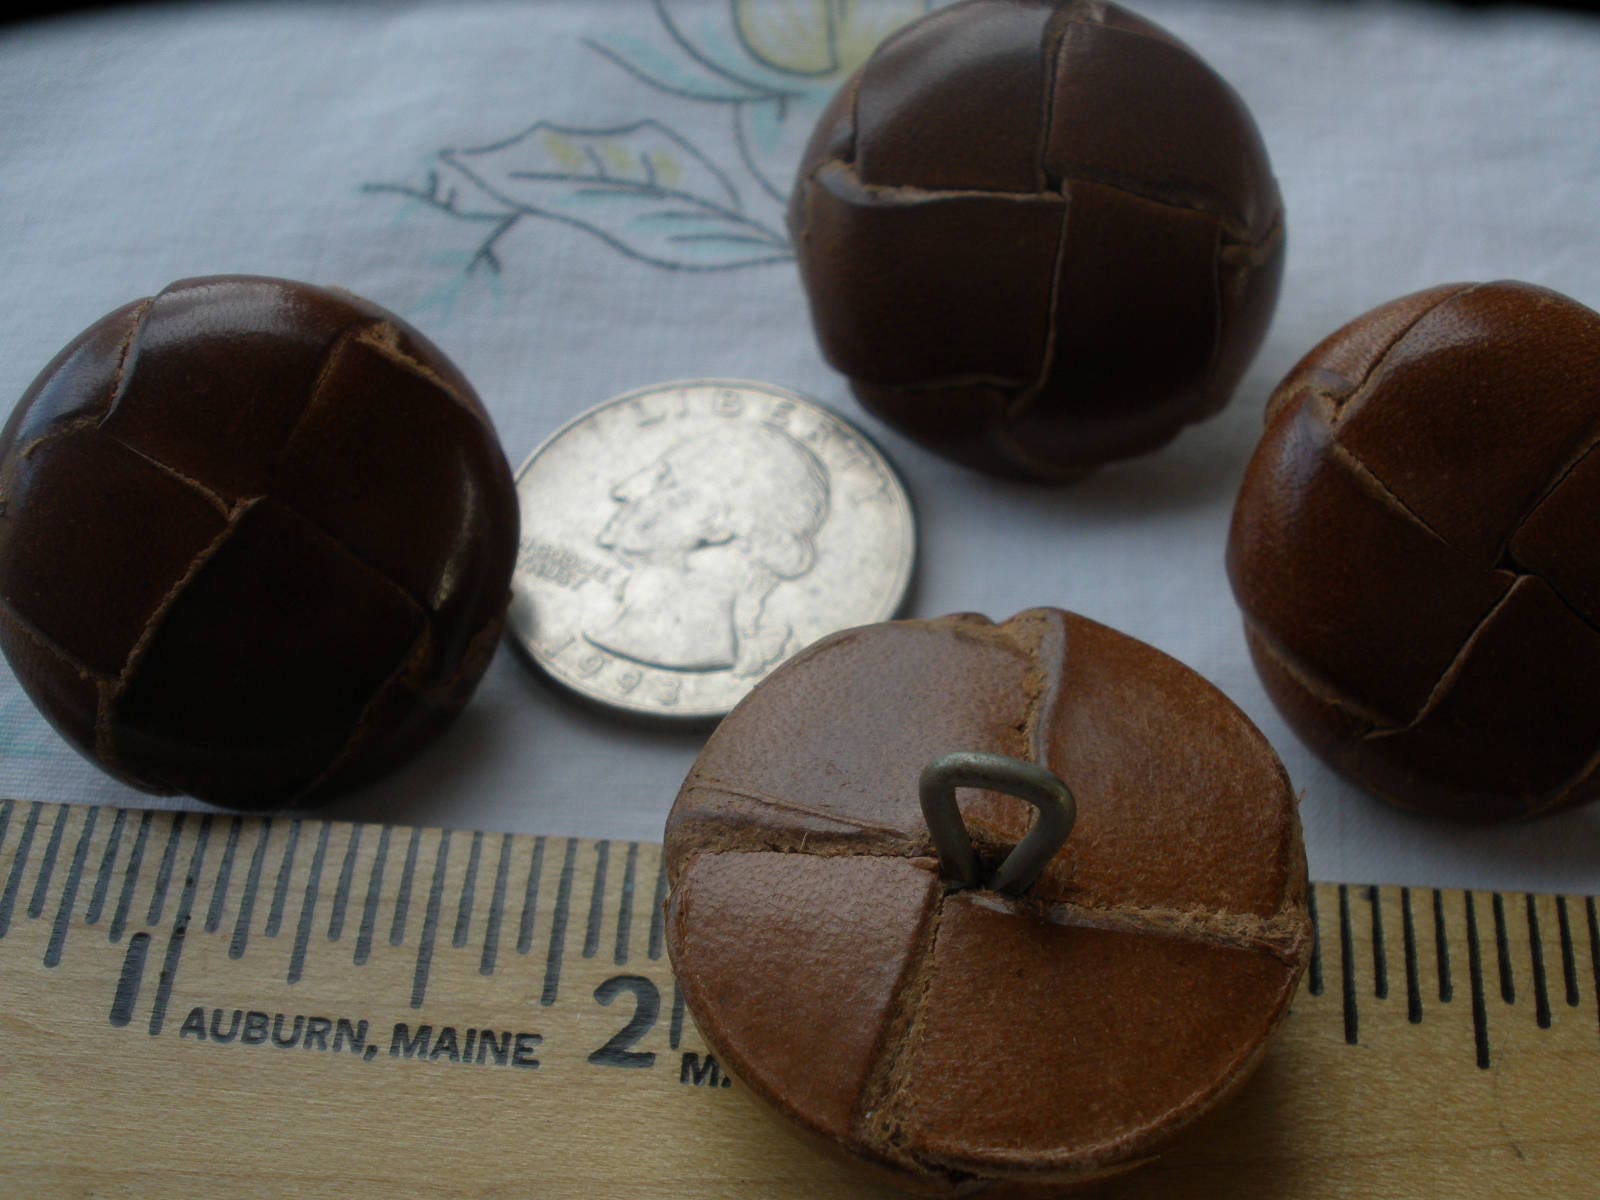 Vintage Faux Leather Button 1-1/8 (28mm) 44L Leather Brown Shank Buttons  #795